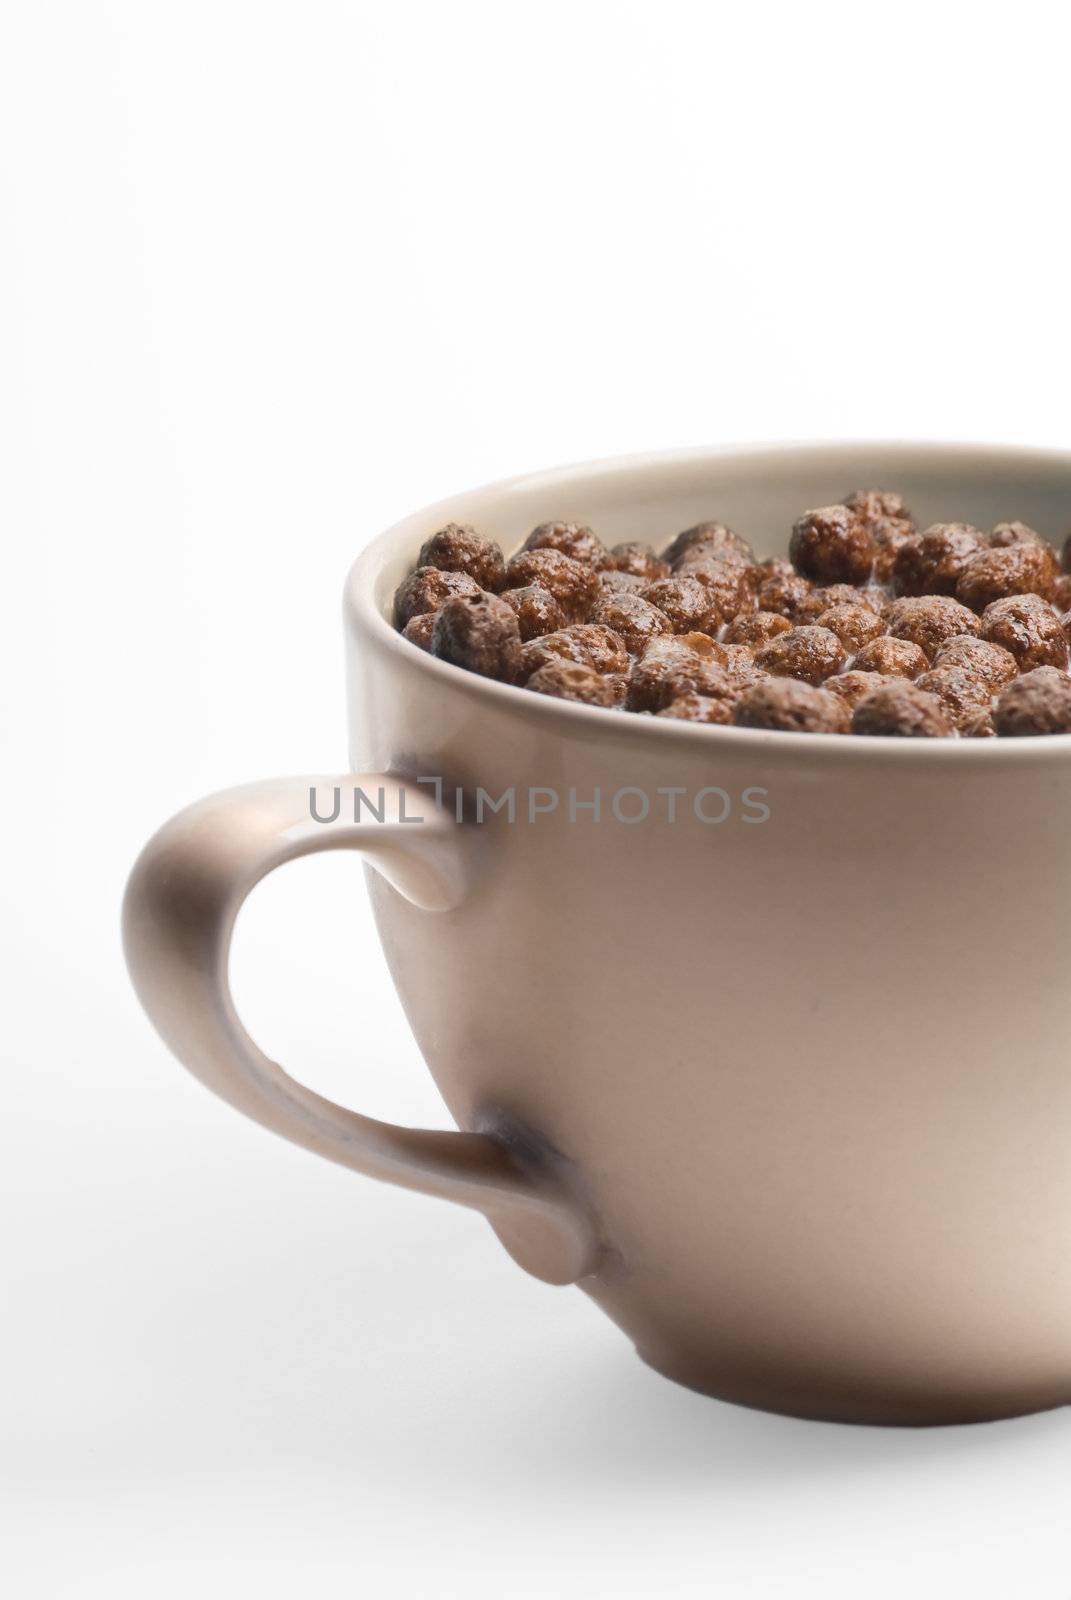 A bowl of chocolate flakes with milk. Very healthy.